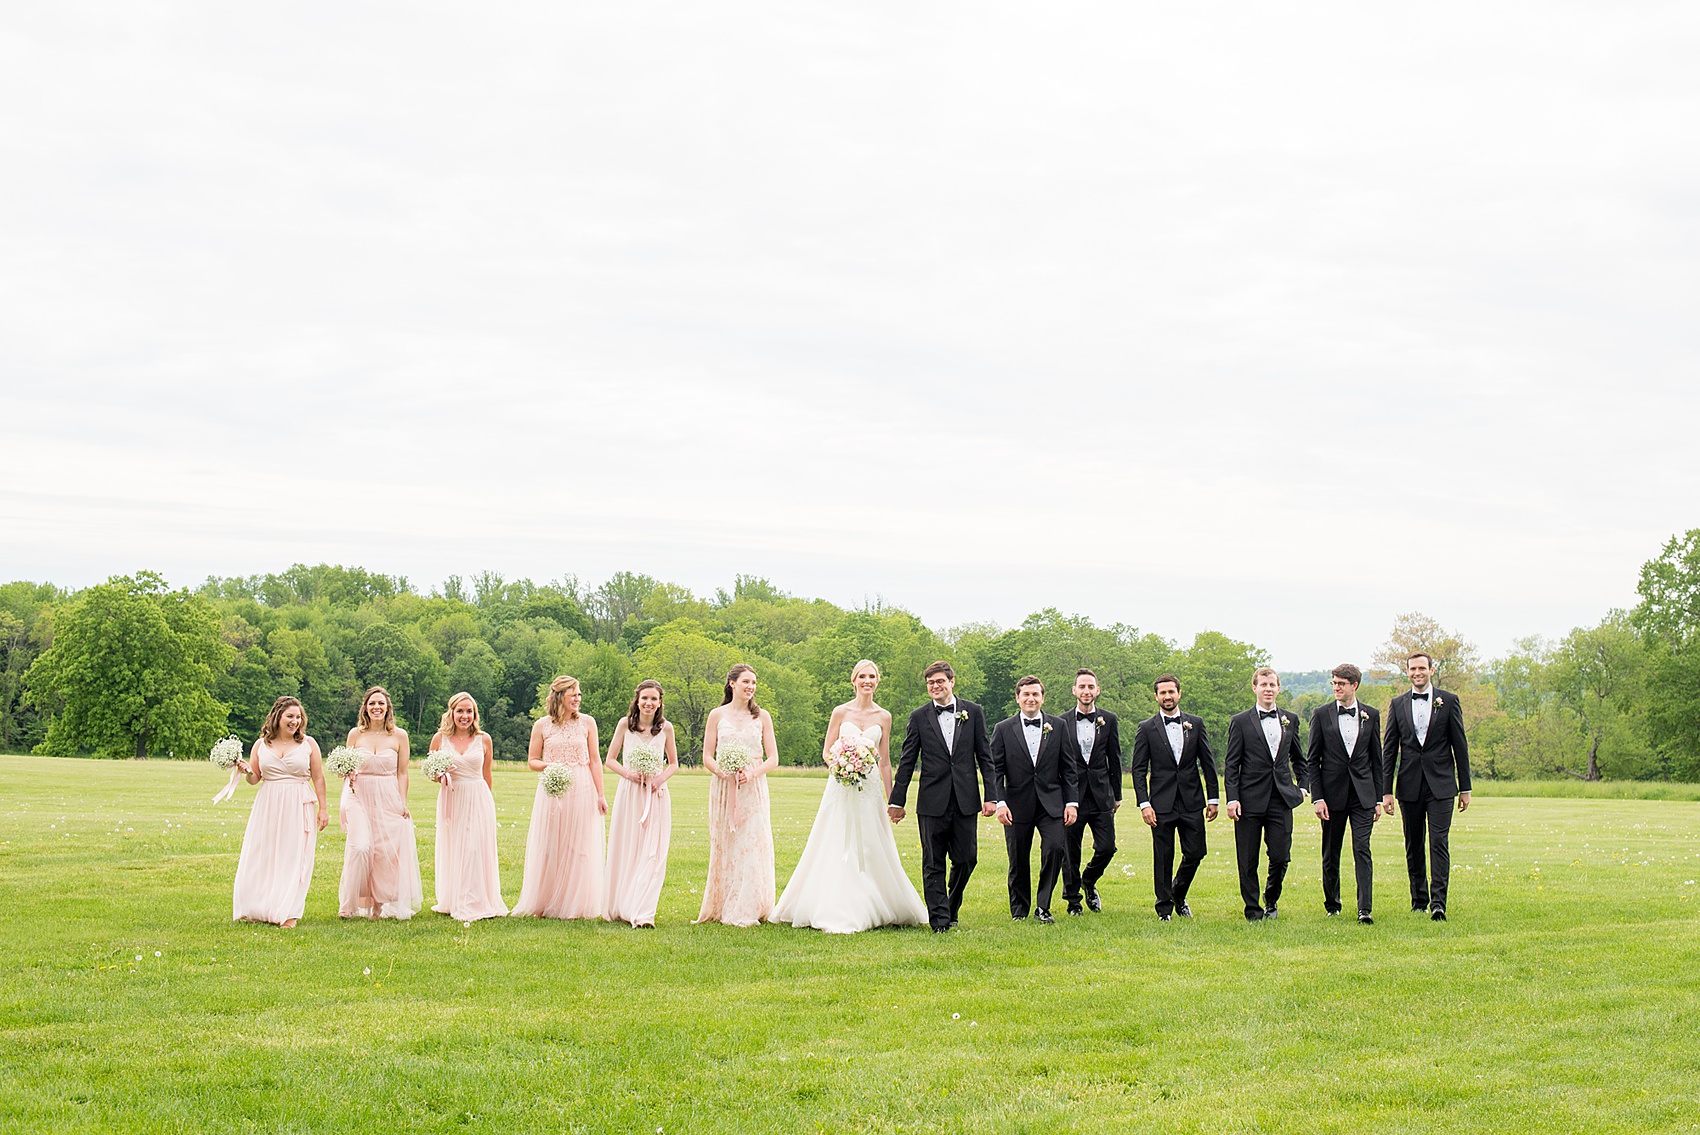 Waveny House wedding photos in Connecticut by Mikkel Paige Photography. Picture of the bride in a strapless gown with her bridesmaids in pink dresses, and maid of honor in a pink floral pattern gown. Bridesmaids held Baby's Breath bouquets. The groomsmen wore classic black tuxedos.